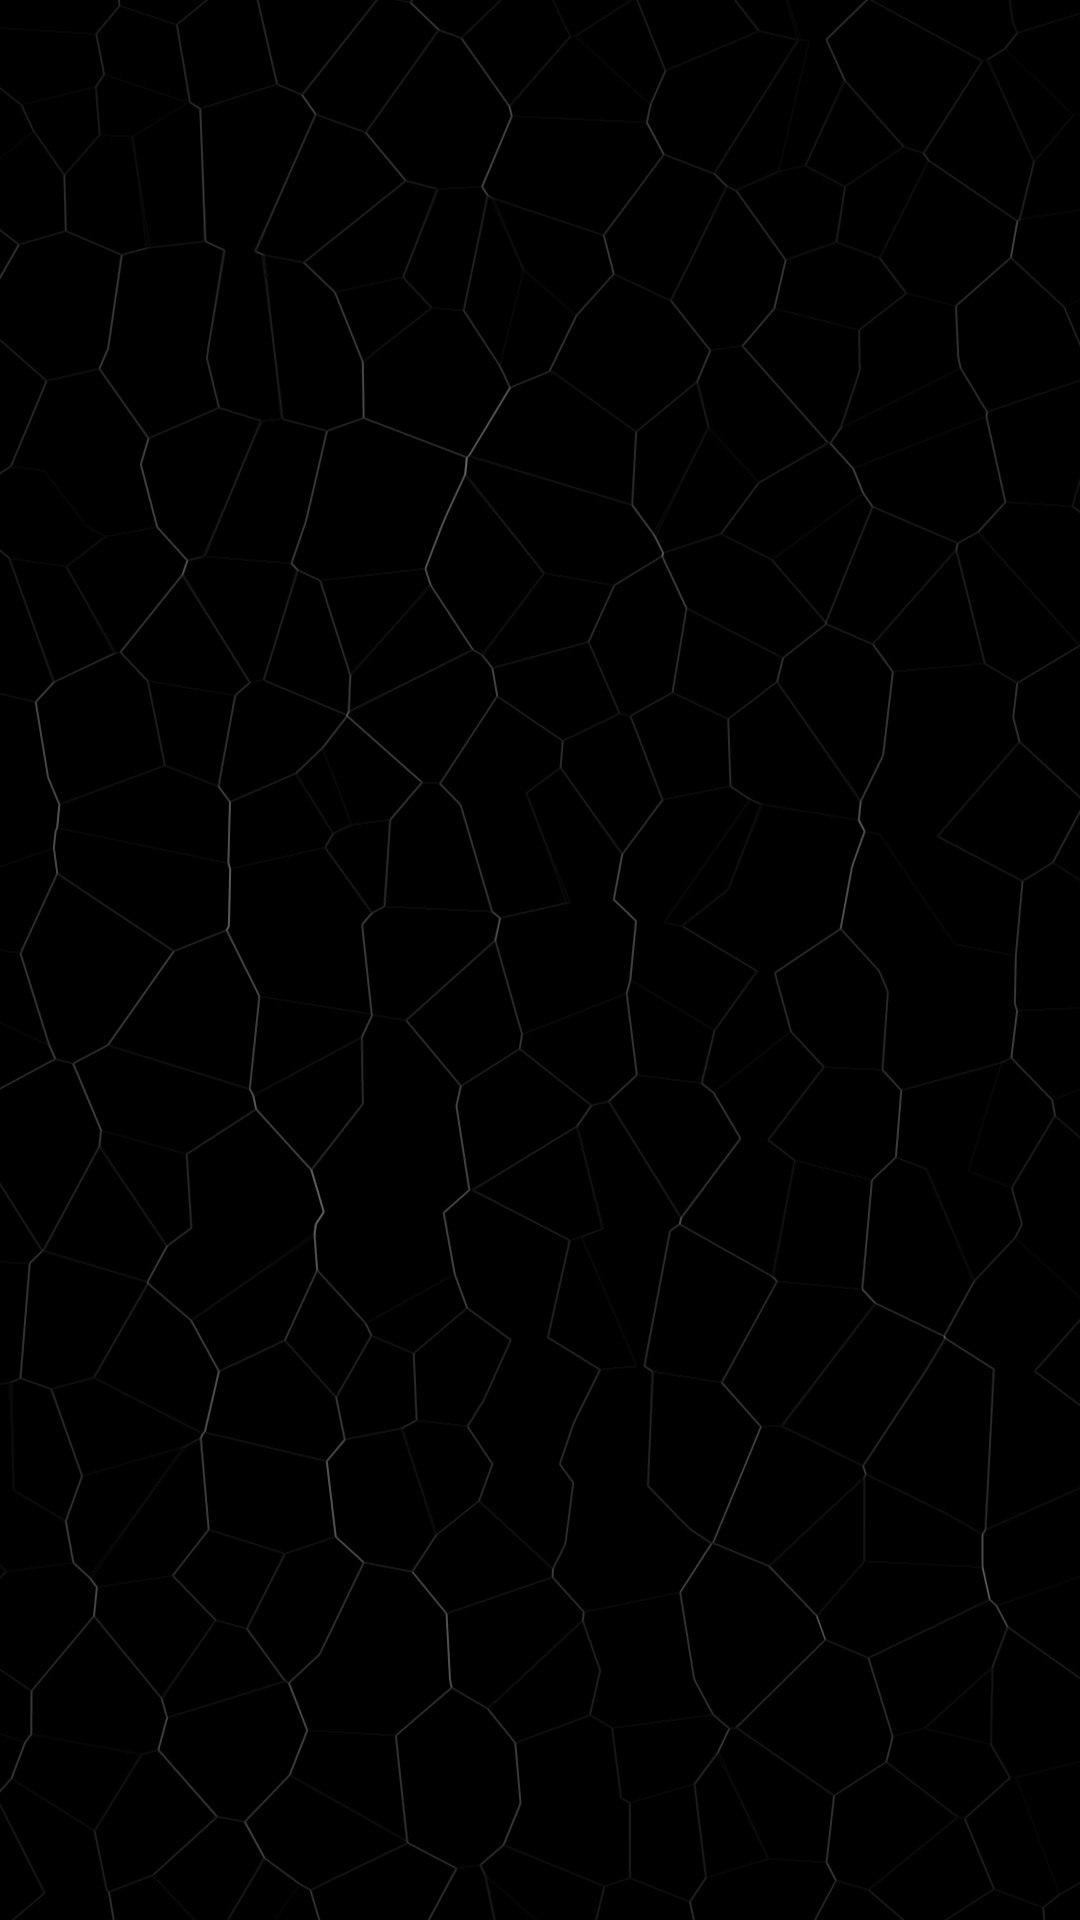 Solid Black iPhone Wallpapers on WallpaperDog